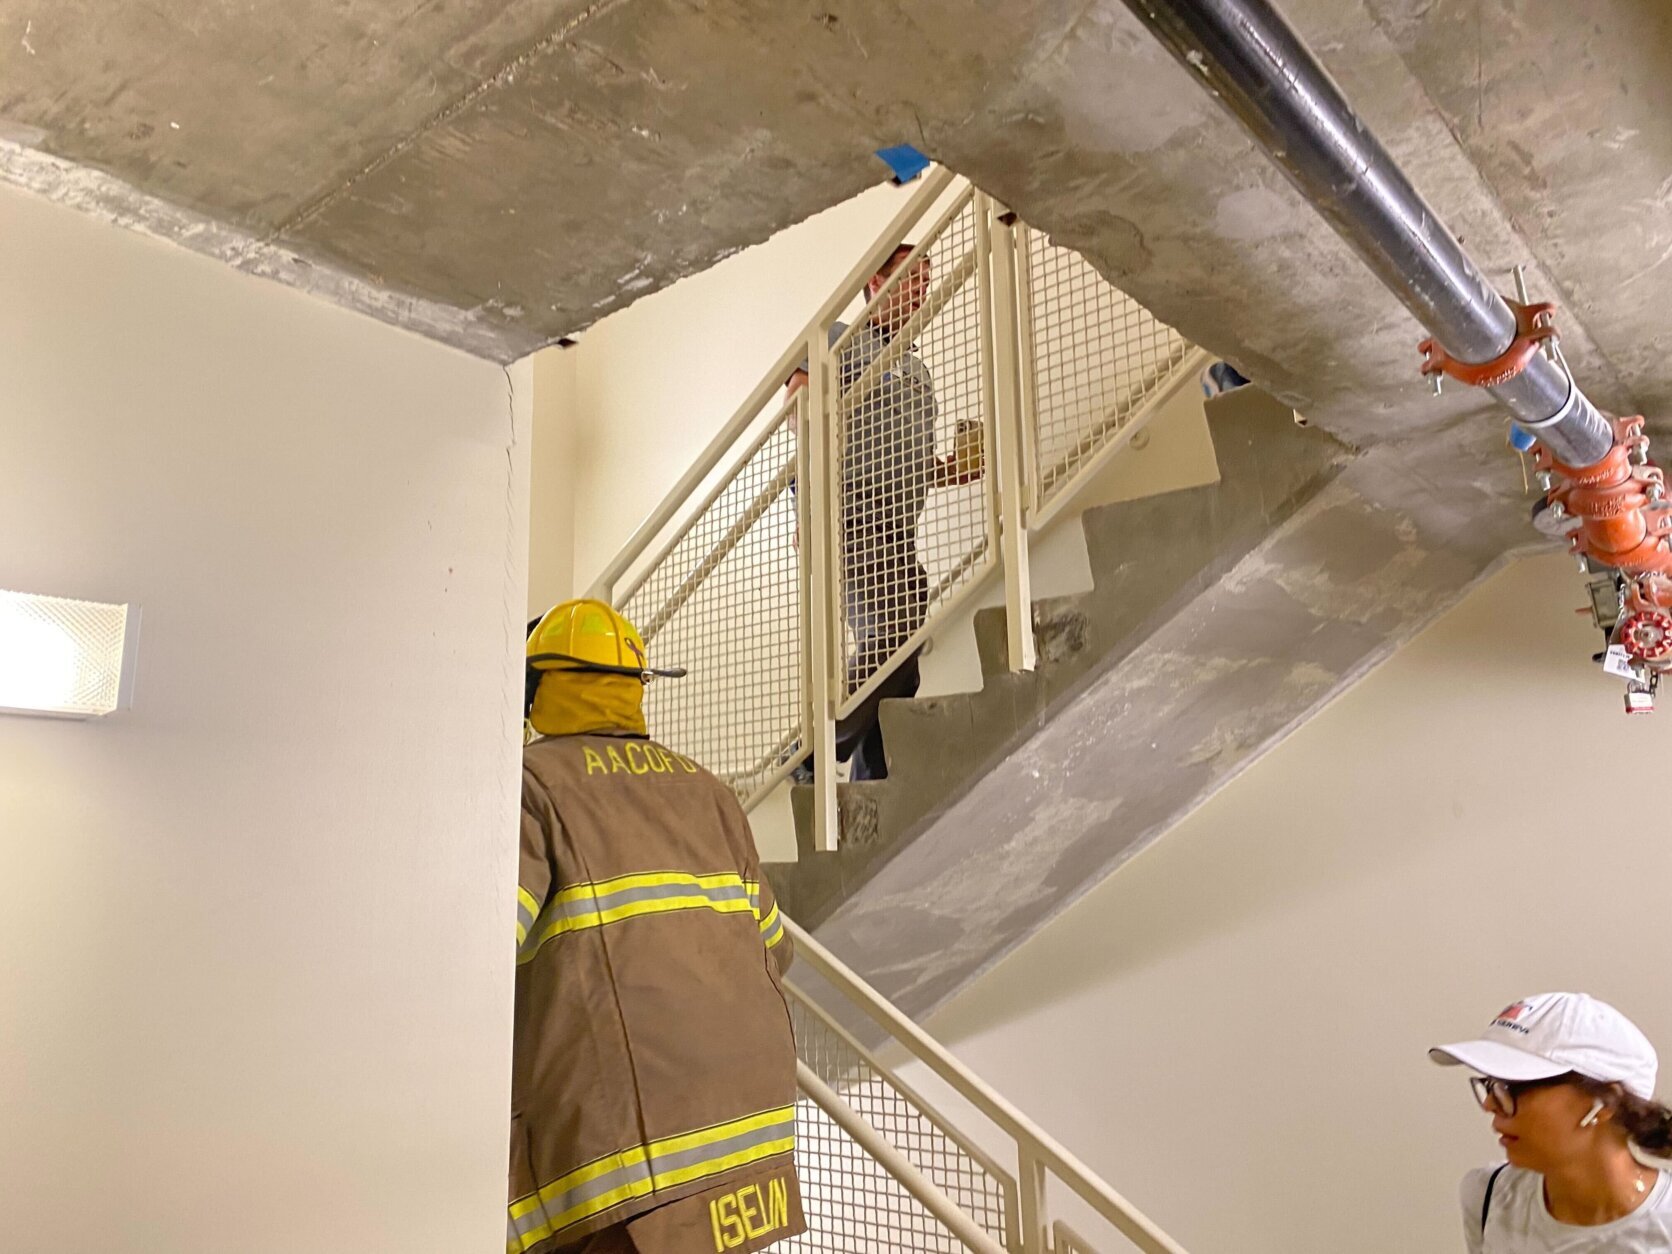 On Sunday morning, firefighters from all across the D.C. area climbed 110 stories worth of stairs at the Gaylord National Resort in Prince George’s County, Maryland, to replicate the climb to the top of the Twin Towers. 